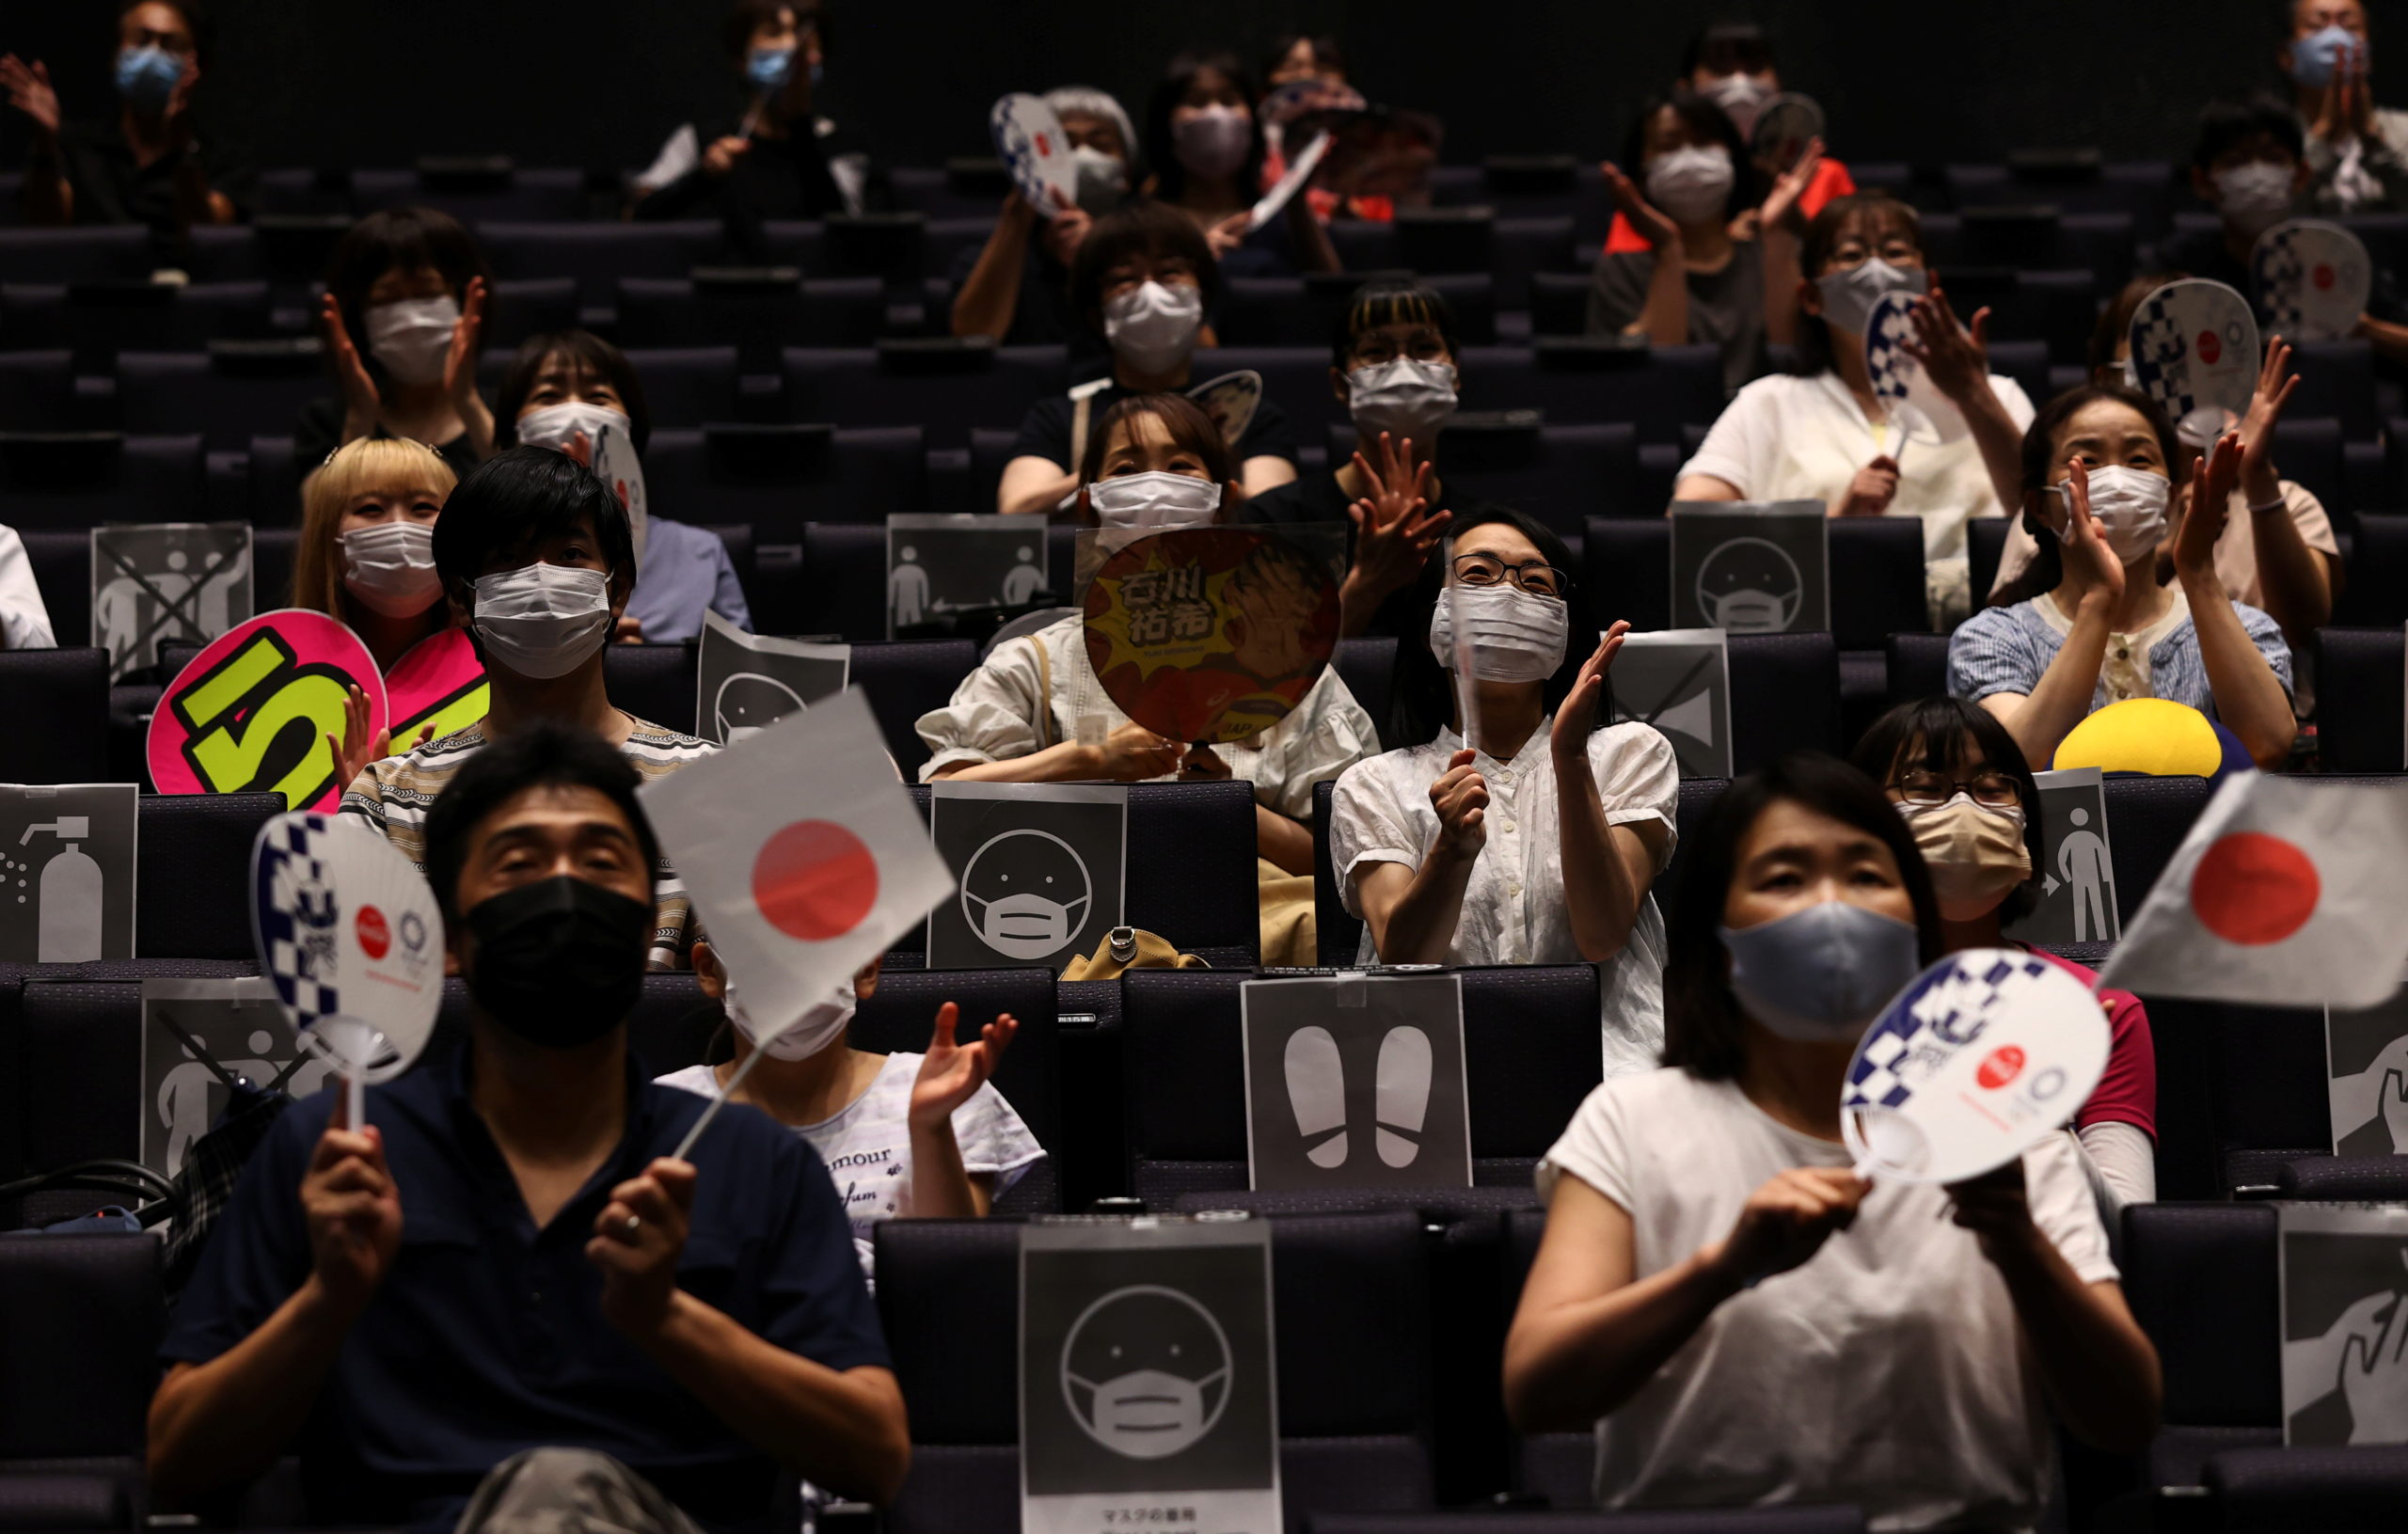 People watch live broadcasting of volleyball match between Japan and Poland on a large screen during a public viewing event for Tokyo 2020 Olympic Games at a theatre in Takasaki, Gunma Prefecture, Japan, July 30, 2021